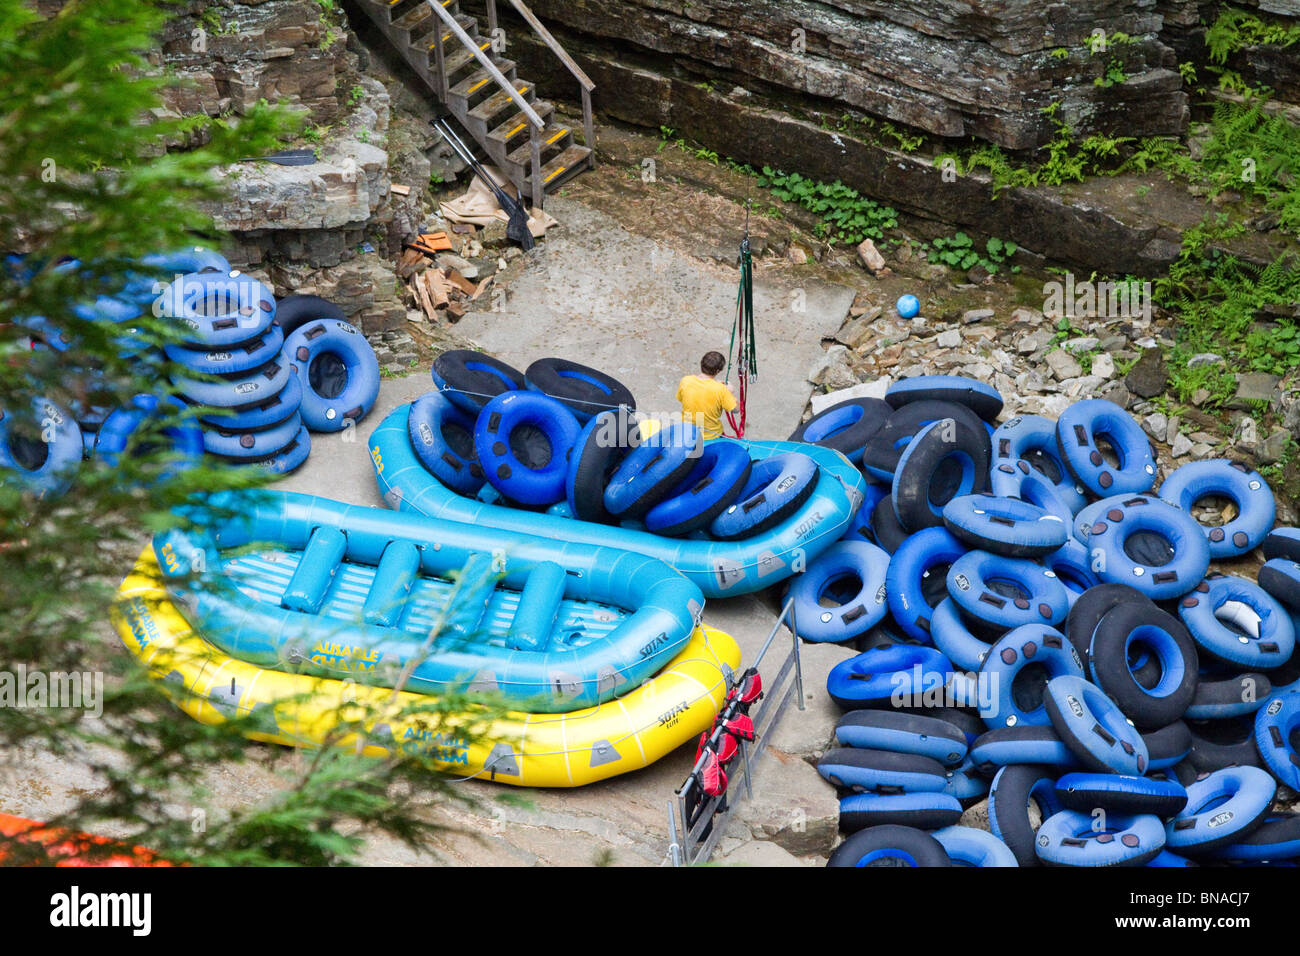 Rubber rafts, life vests and tubes for floating down the Ausable Chasm in the Adirondack State Park of New York. Rafting Stock Photo